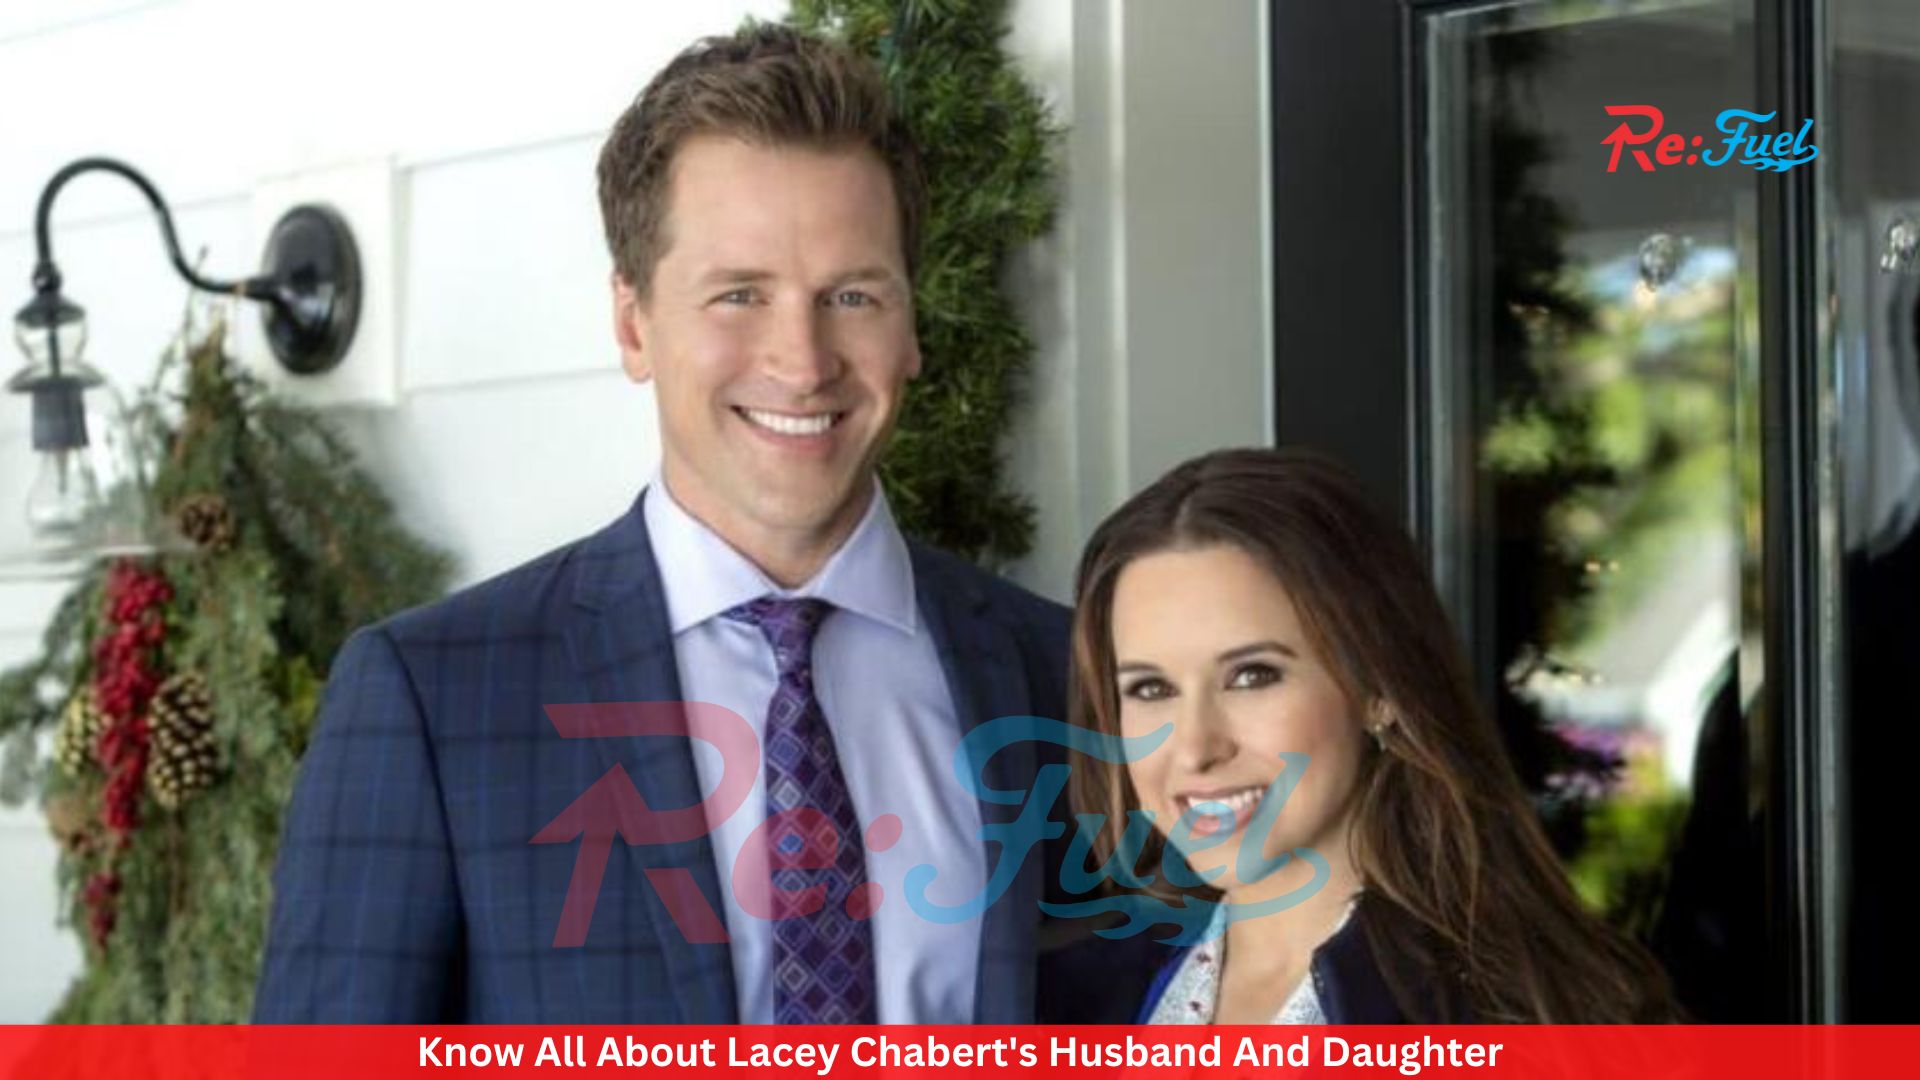 Know All About Lacey Chabert's Husband And Daughter